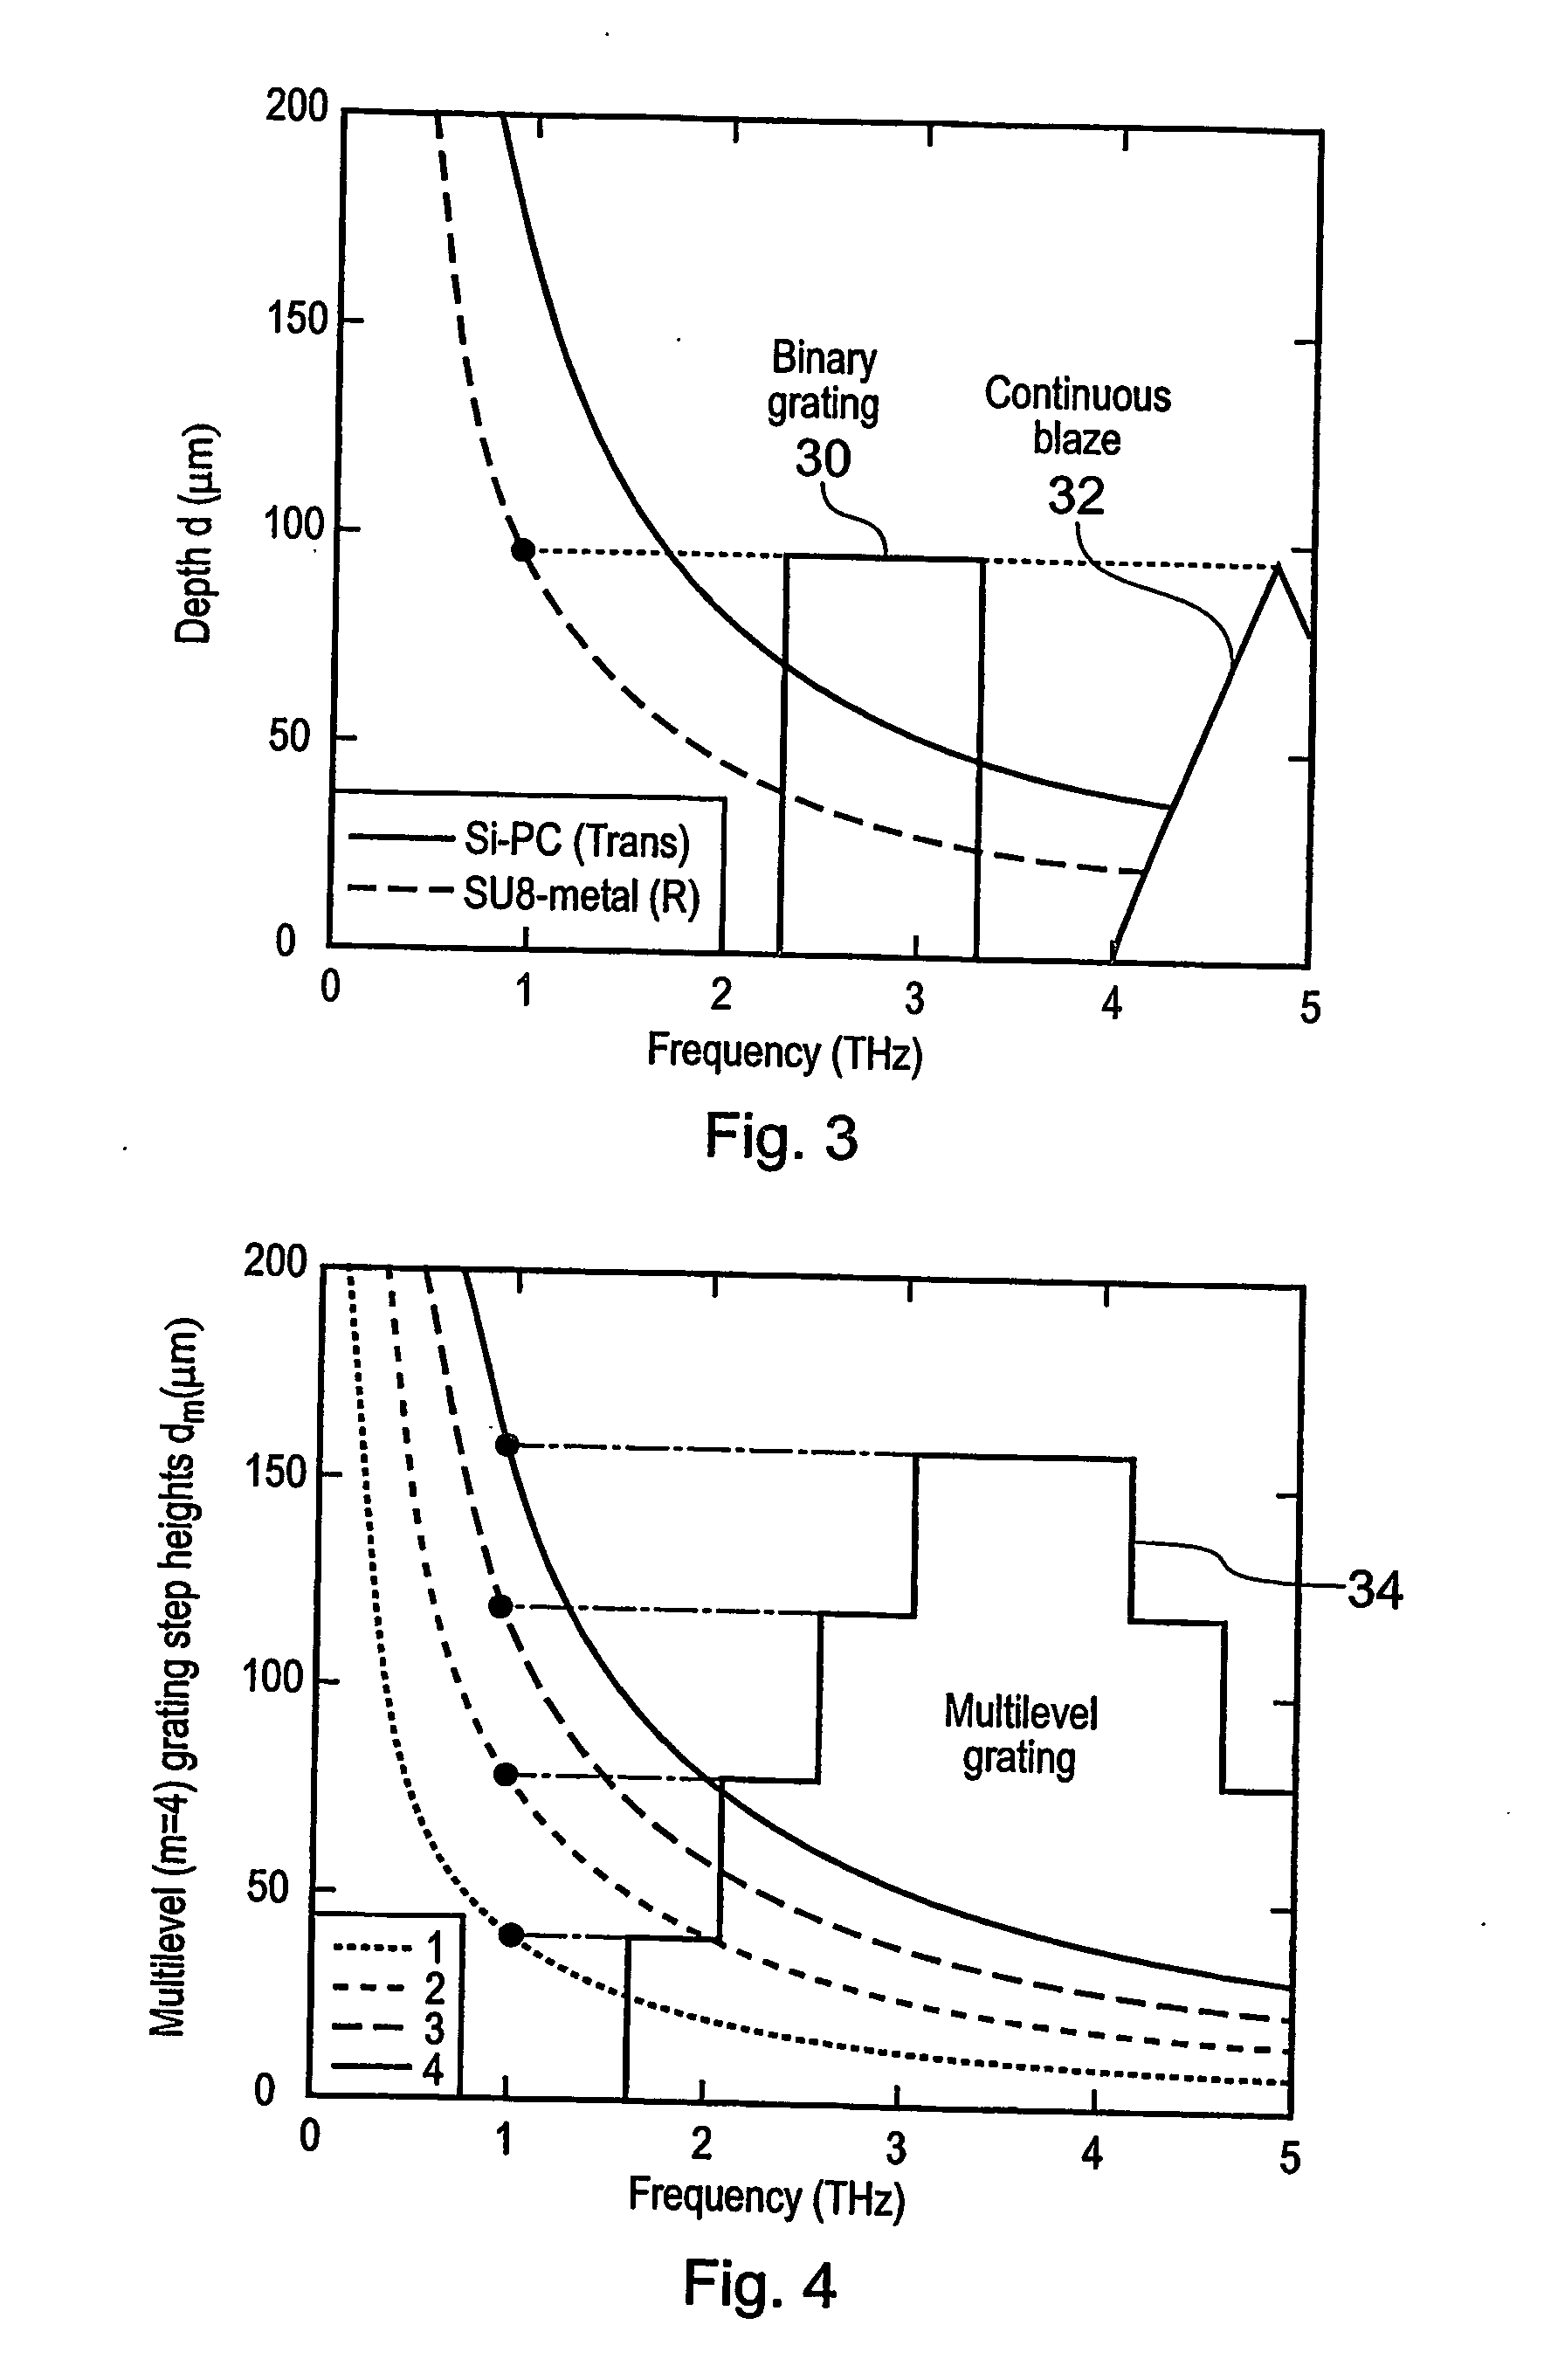 Security label which is optically read by terahertz radiation